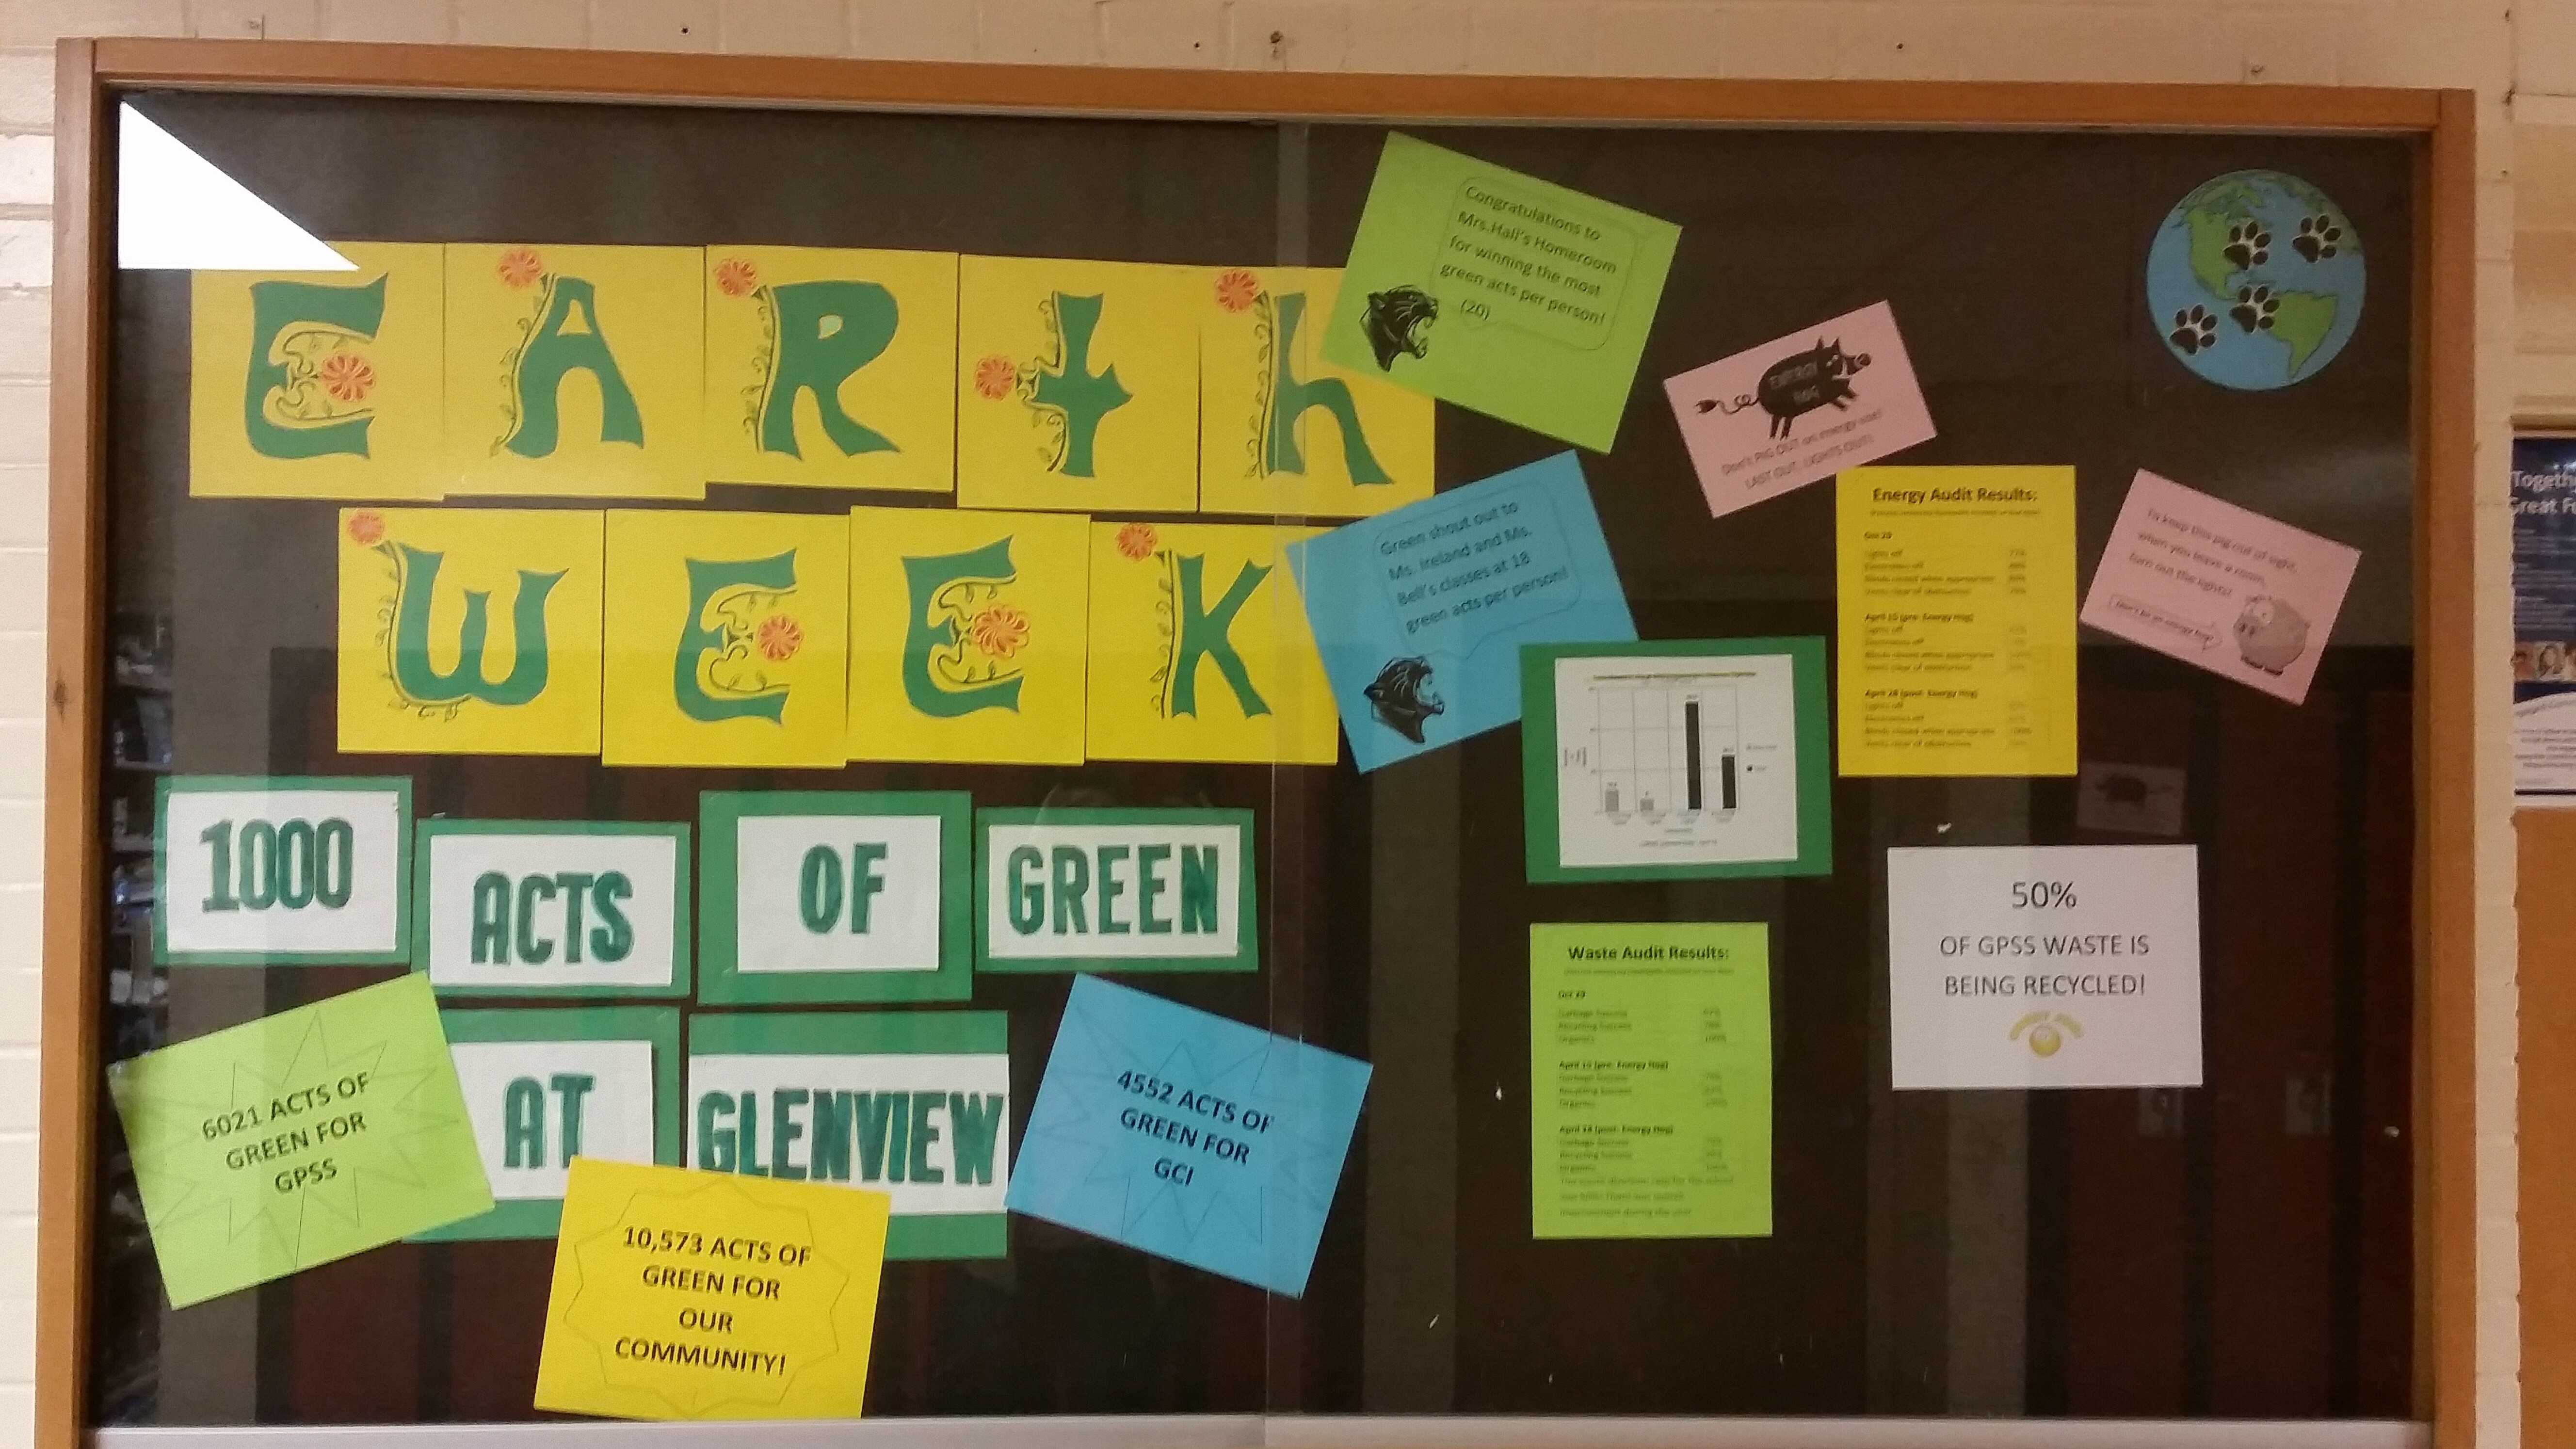 An Earth Week initiative display by Glenview Park SS. 